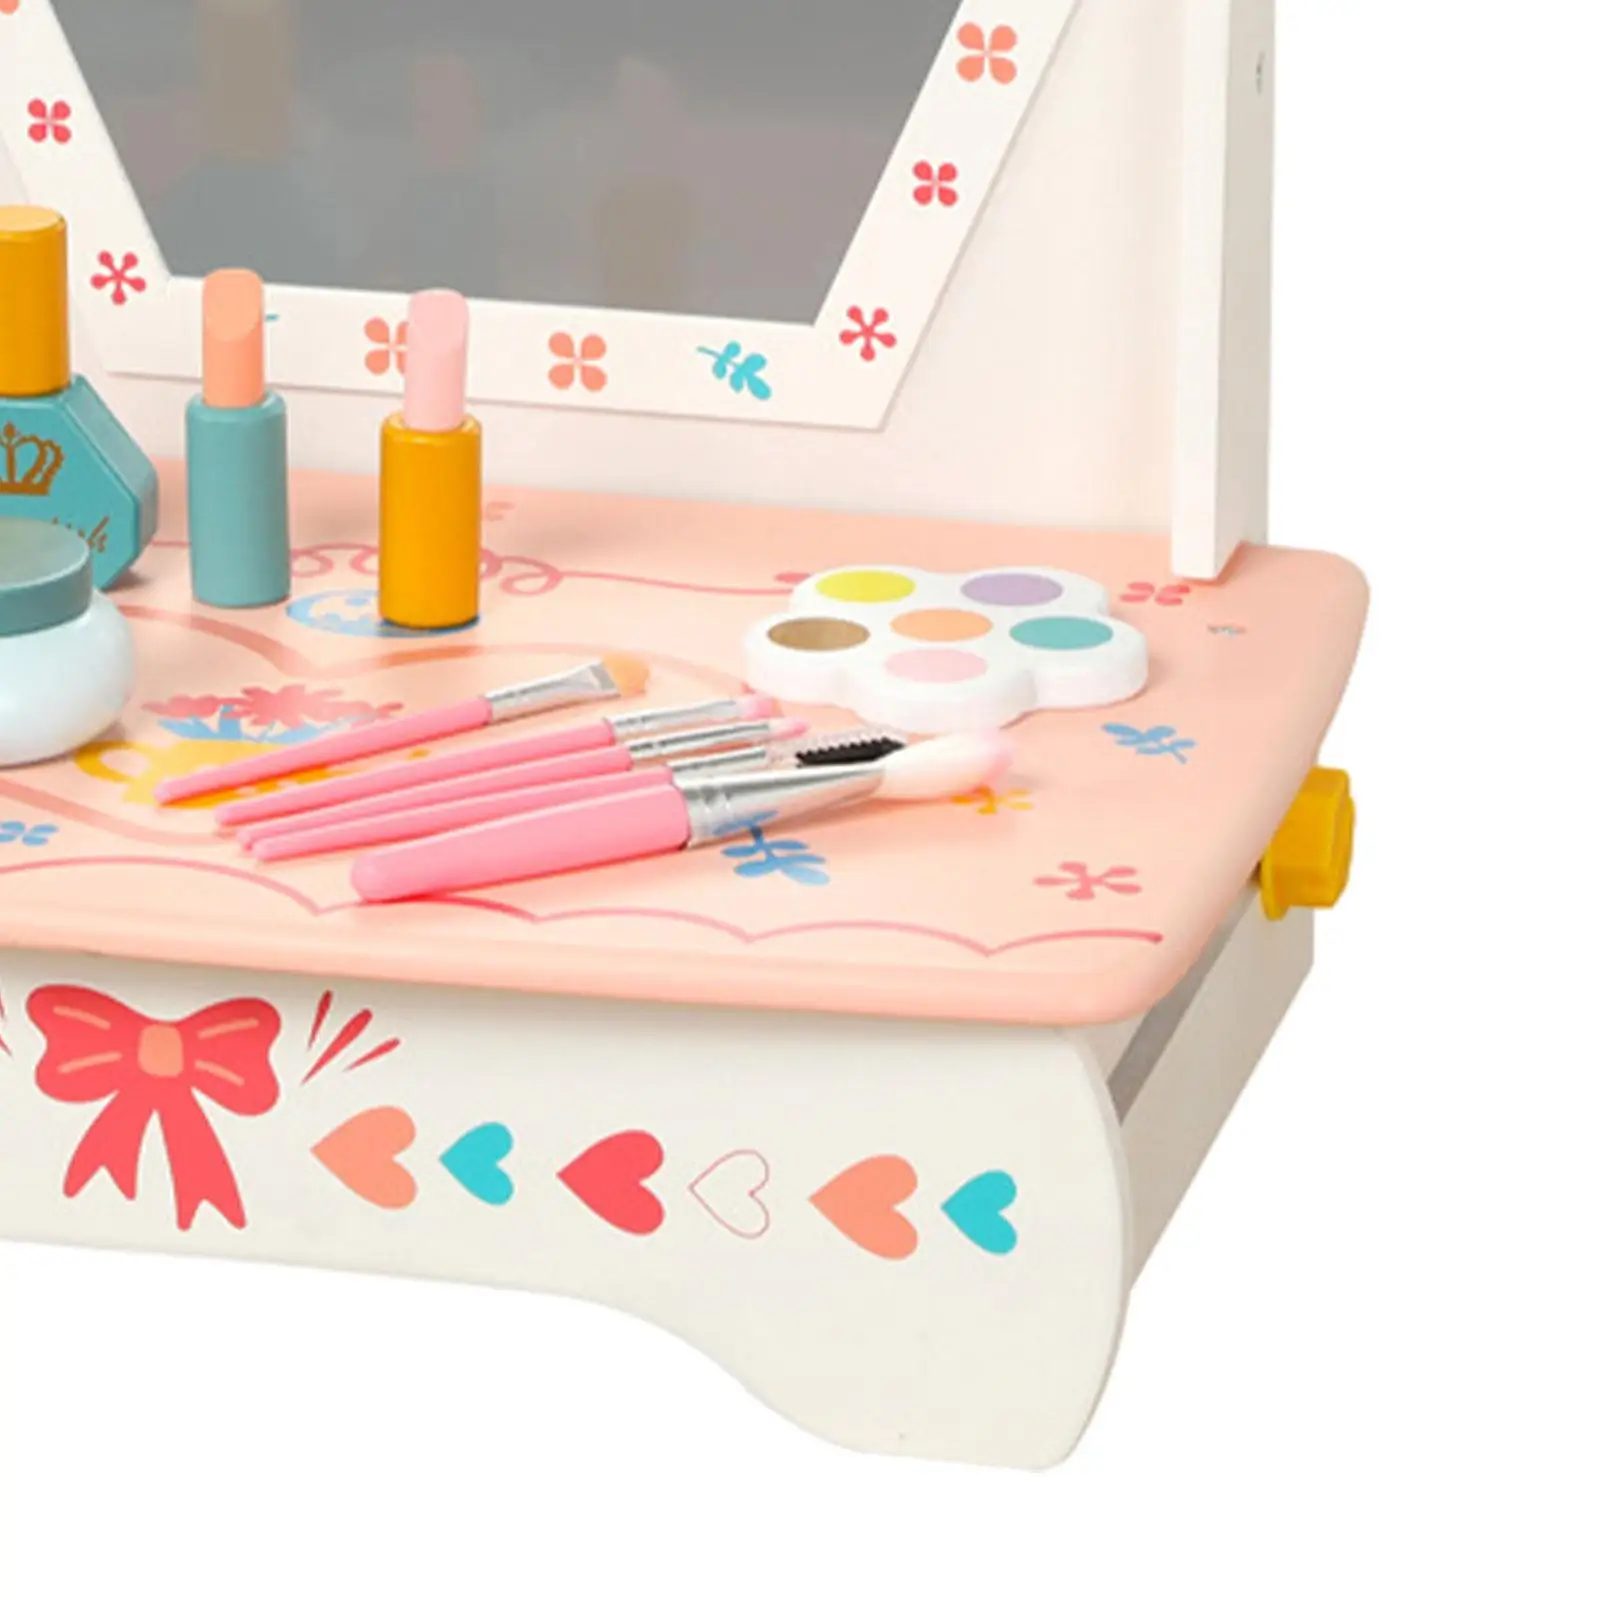 Wooden Vanity Table Toy Montessori Beauty Playset with Accessories Wooden Princess Vanity Table for Girls Age 3 4 5 6